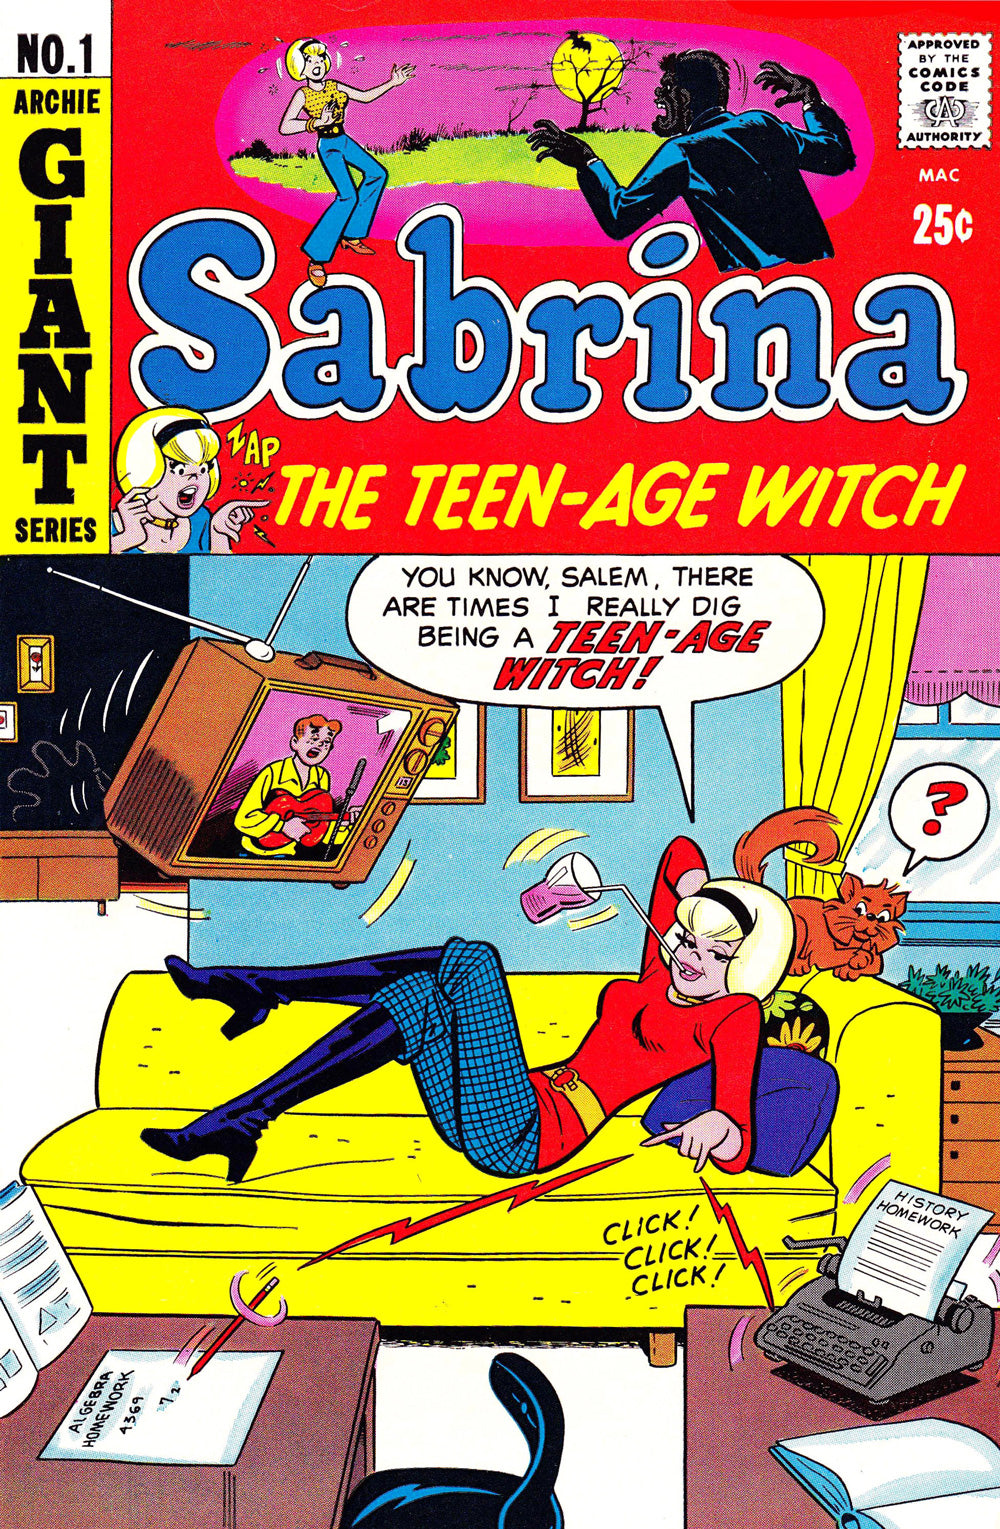 Iconic cover of Sabrina the Teenage Witch #1 from 1971, of Sabrina on a yellow couch using her magic and watching Archie play guitar on TV. Salem is an orange cat perched atop the couch. Art by Dan DeCarlo.